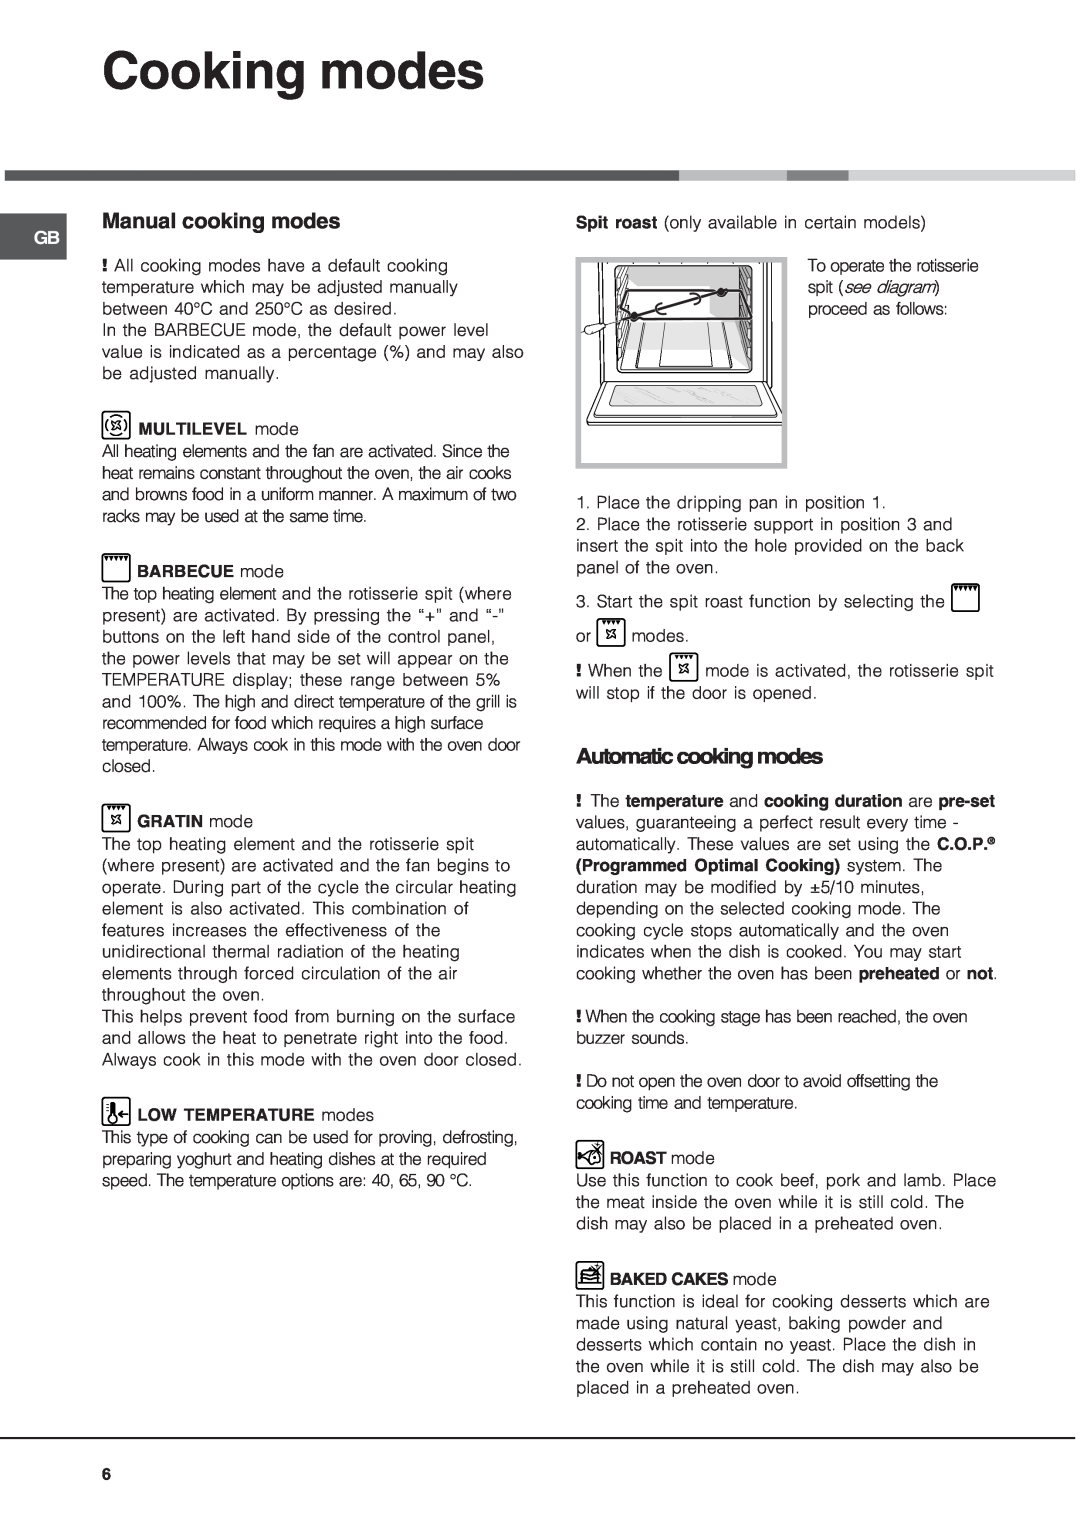 Hotpoint SE1032X operating instructions Cooking modes, Manual cooking modes, Automatic cooking modes 